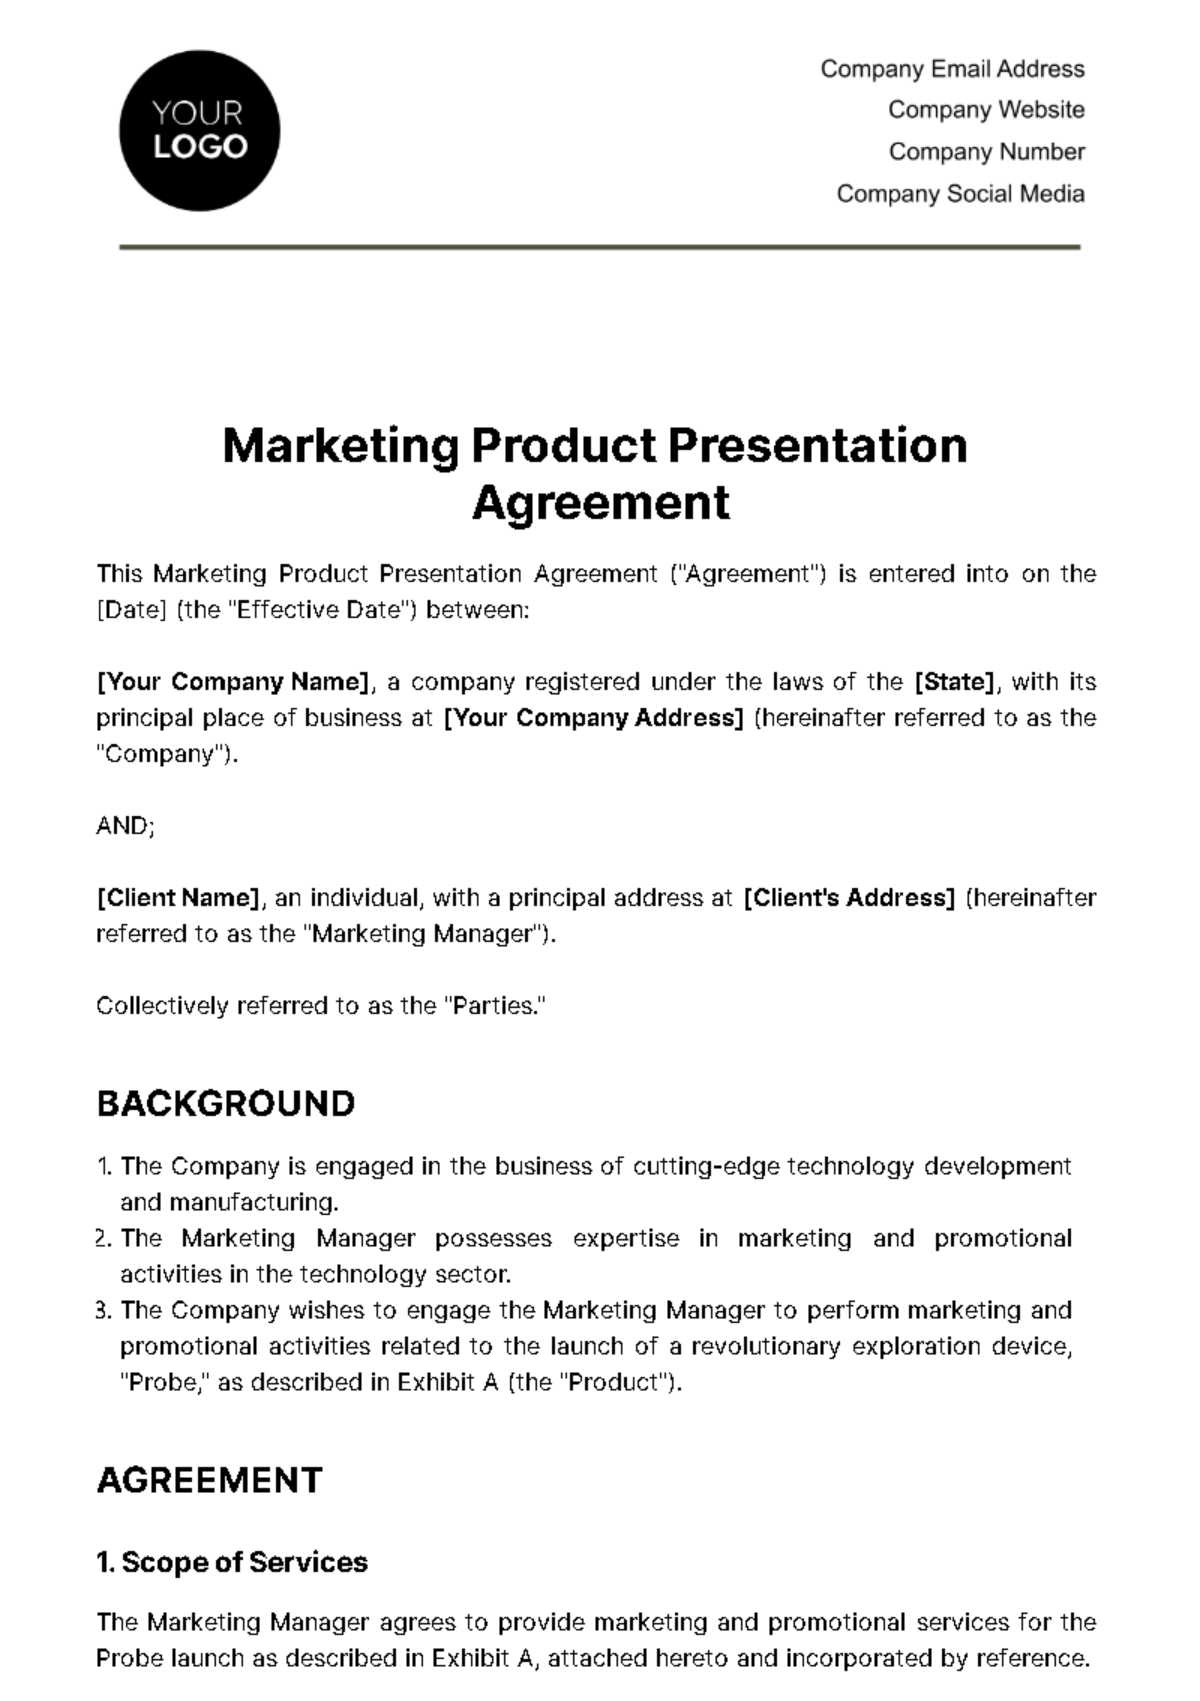 Free Marketing Product Presentation Agreement Template